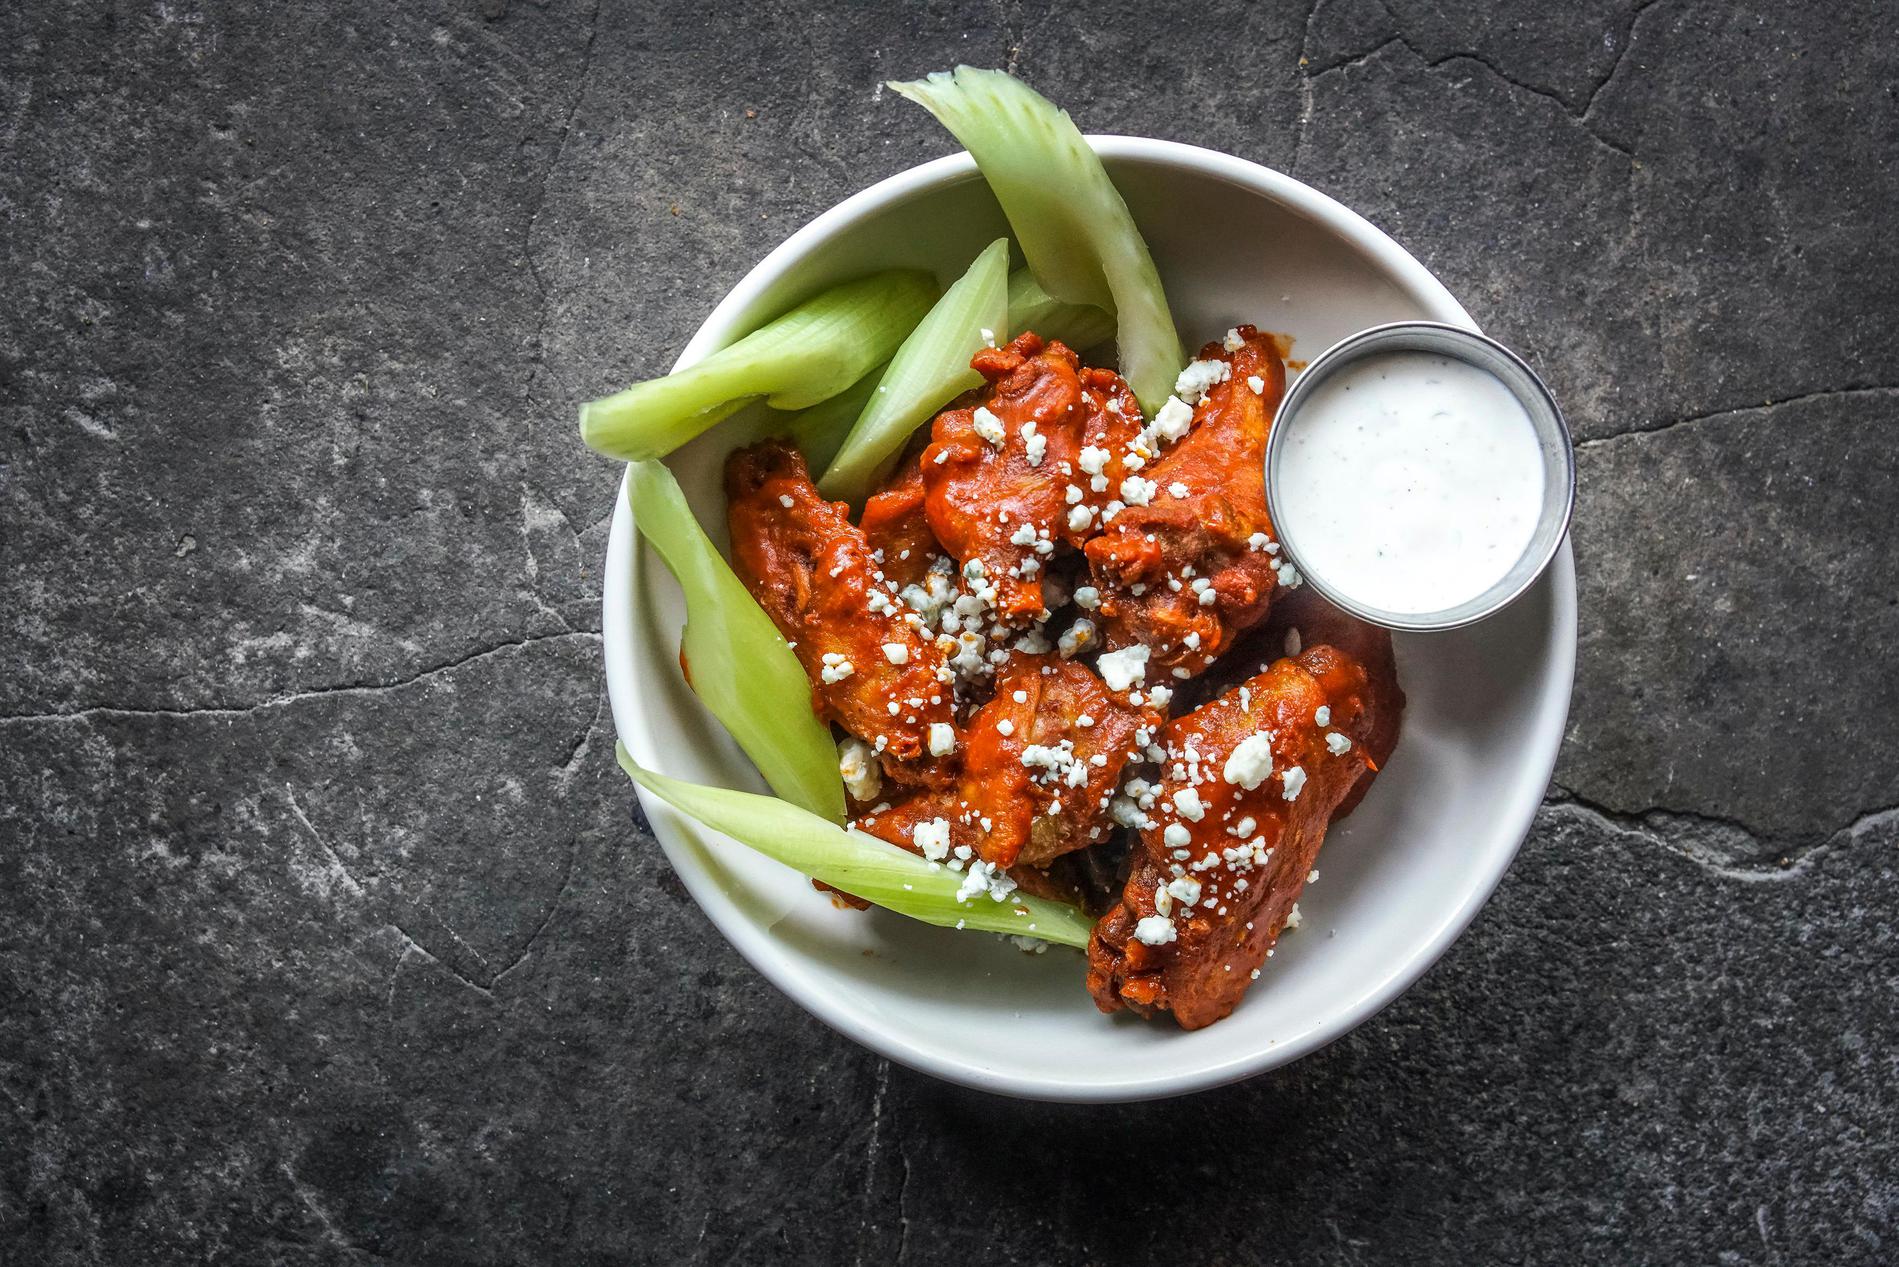 Buffalo wings with blue cheese and ranch